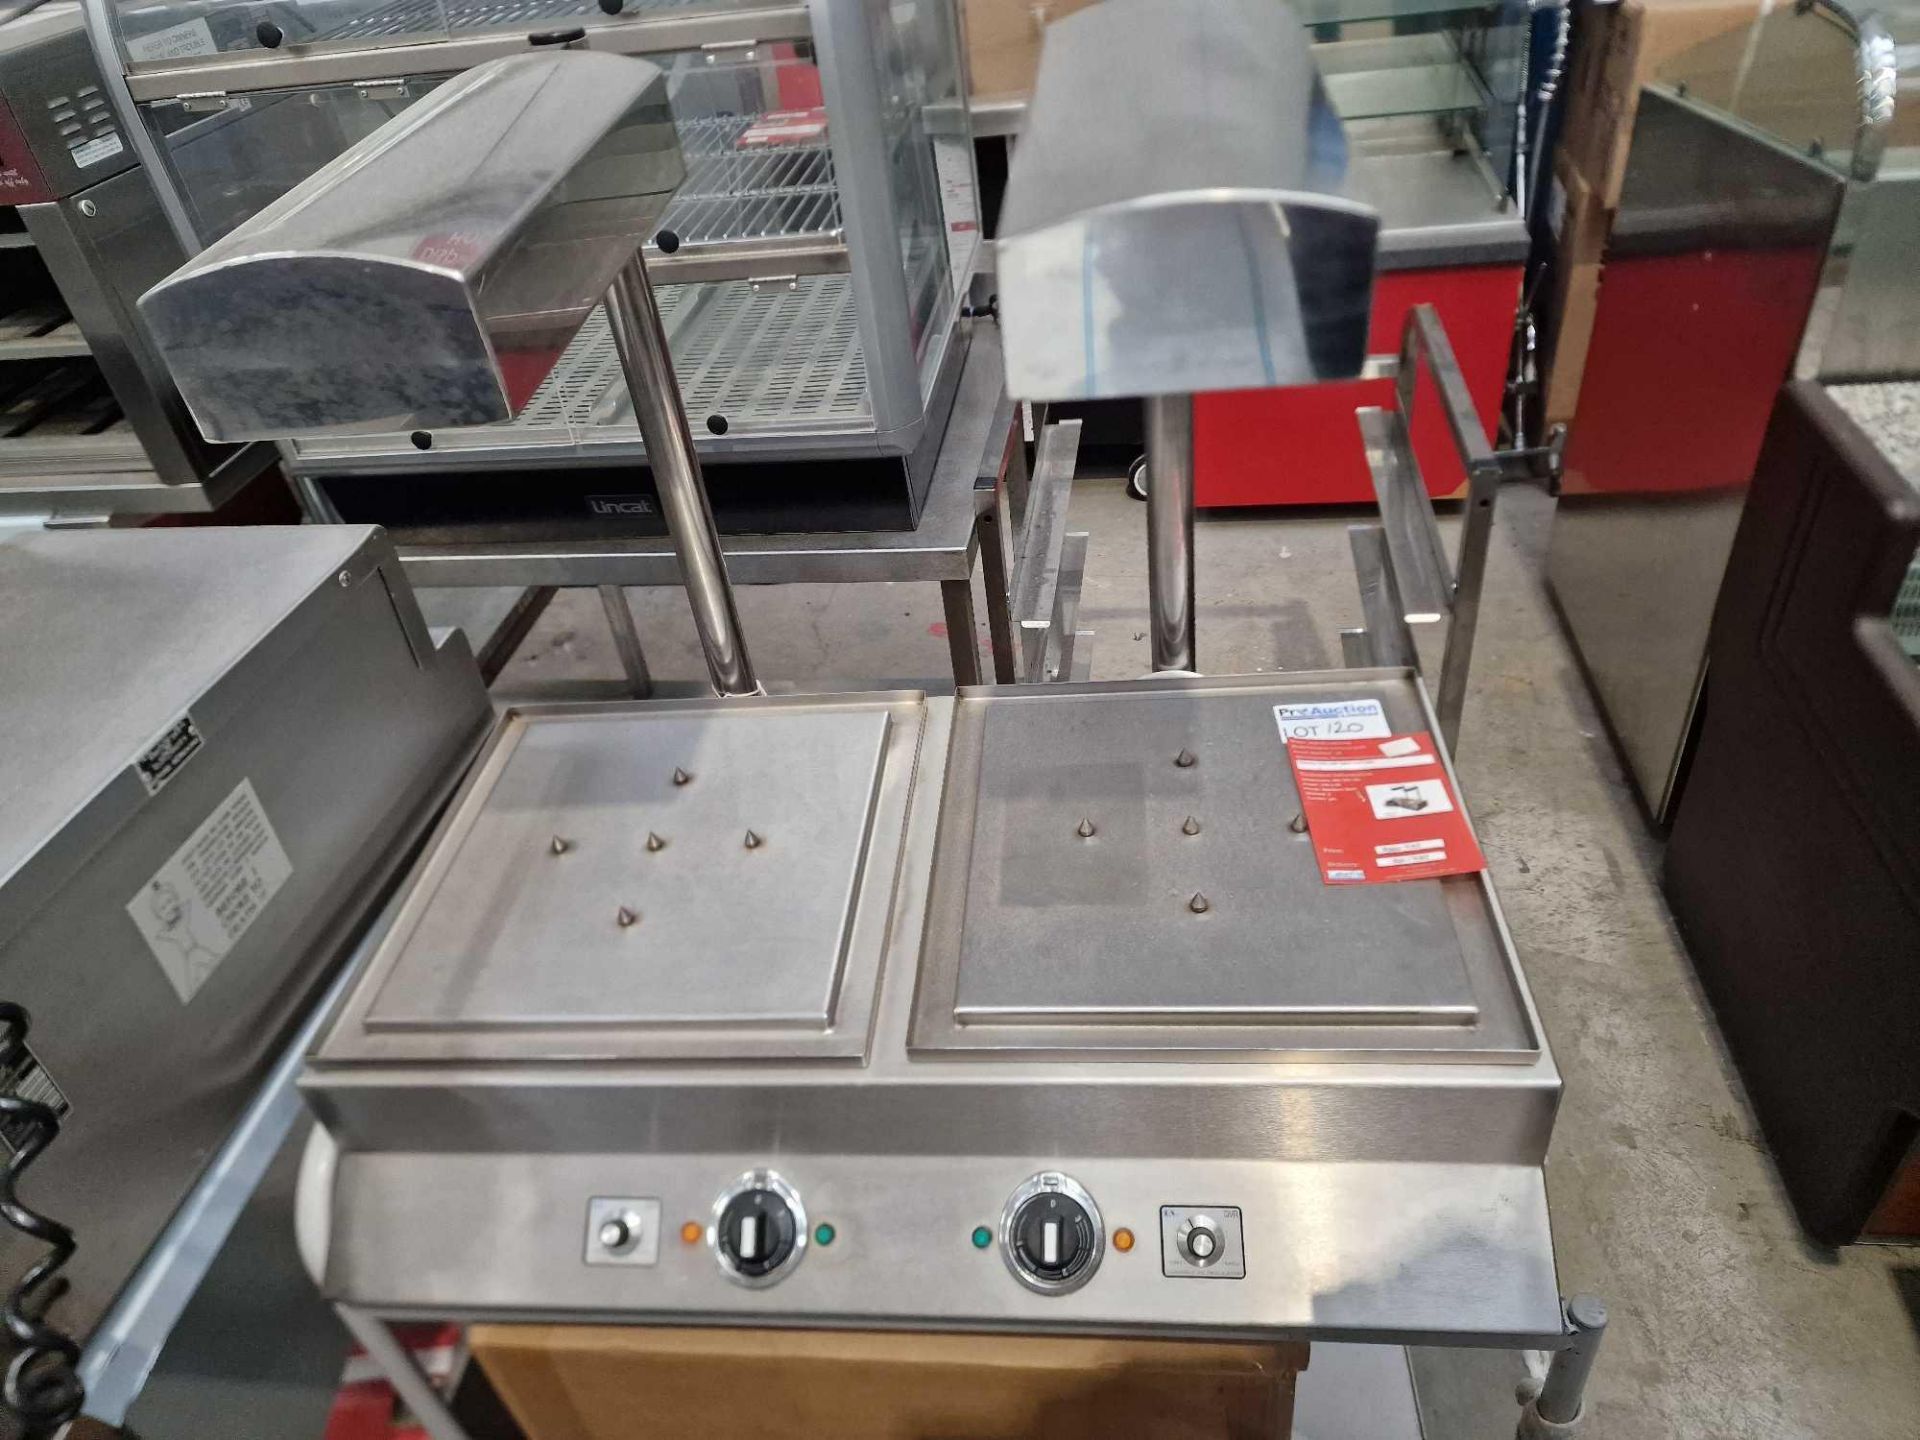 Aspull Catering Heated Carvery Unit with Lights - Our stainless steel free standing single or double